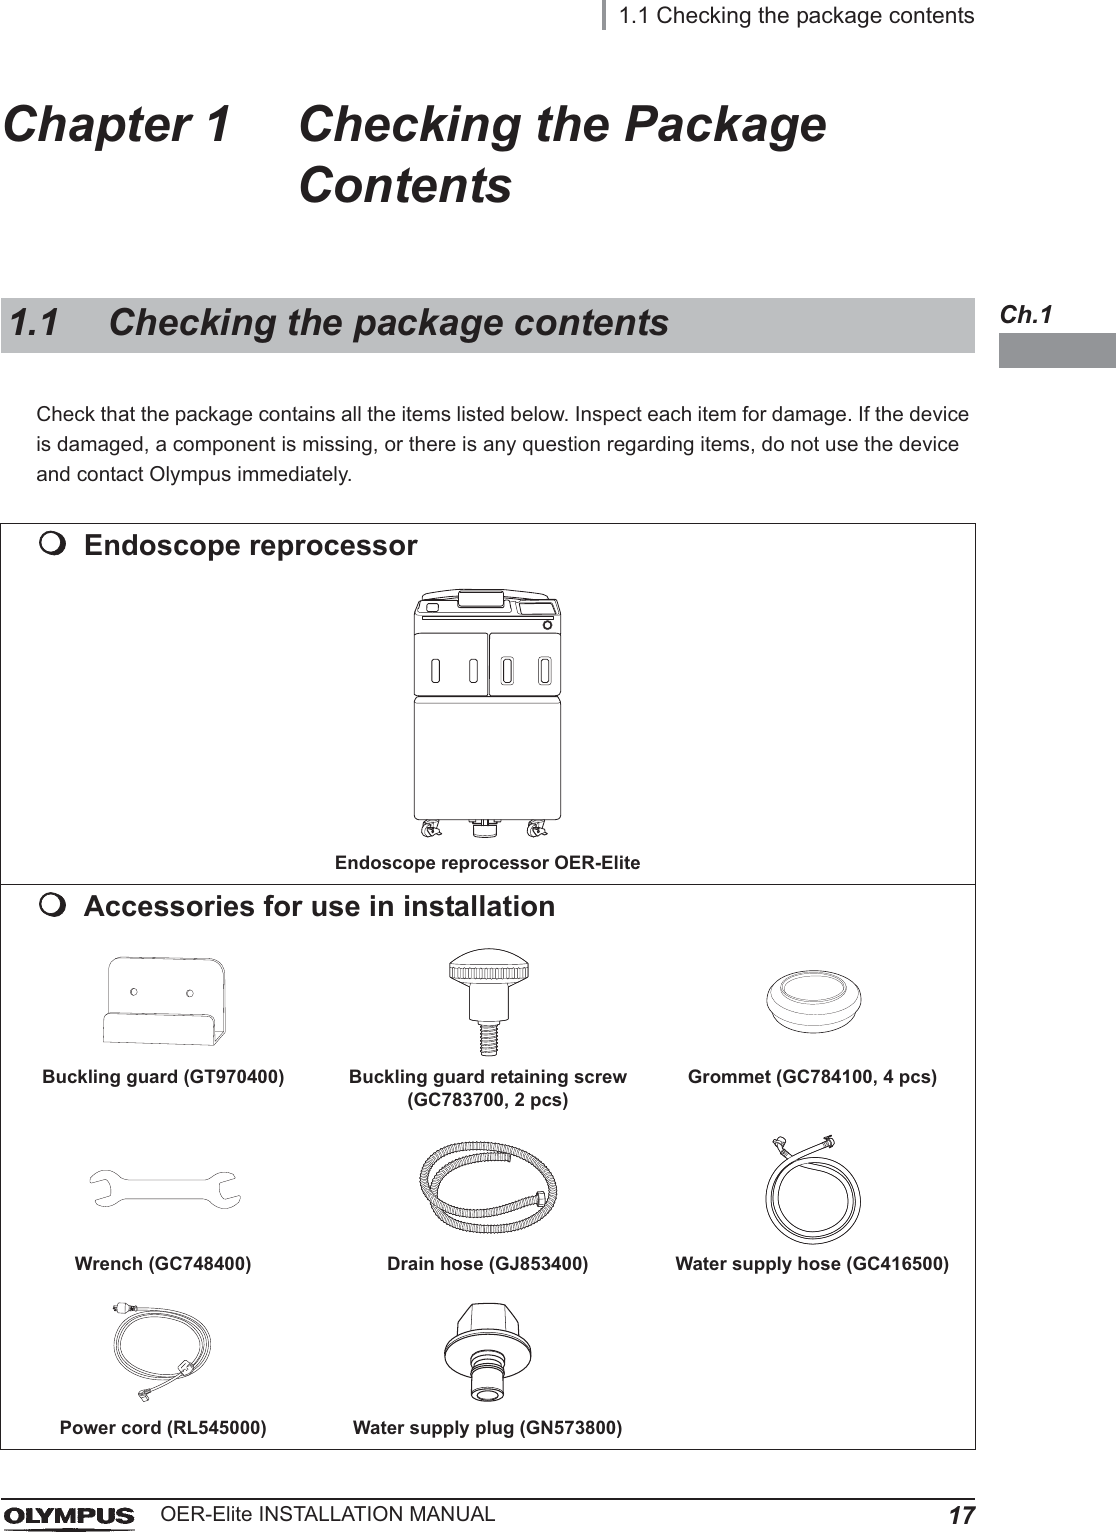 1.1 Checking the package contents17OER-Elite INSTALLATION MANUALCh.1Chapter 1 Checking the Package ContentsCheck that the package contains all the items listed below. Inspect each item for damage. If the device is damaged, a component is missing, or there is any question regarding items, do not use the device and contact Olympus immediately.1.1 Checking the package contentsEndoscope reprocessorEndoscope reprocessor OER-EliteAccessories for use in installationBuckling guard (GT970400) Buckling guard retaining screw (GC783700, 2 pcs)Grommet (GC784100, 4 pcs)Wrench (GC748400) Drain hose (GJ853400) Water supply hose (GC416500)Power cord (RL545000) Water supply plug (GN573800)